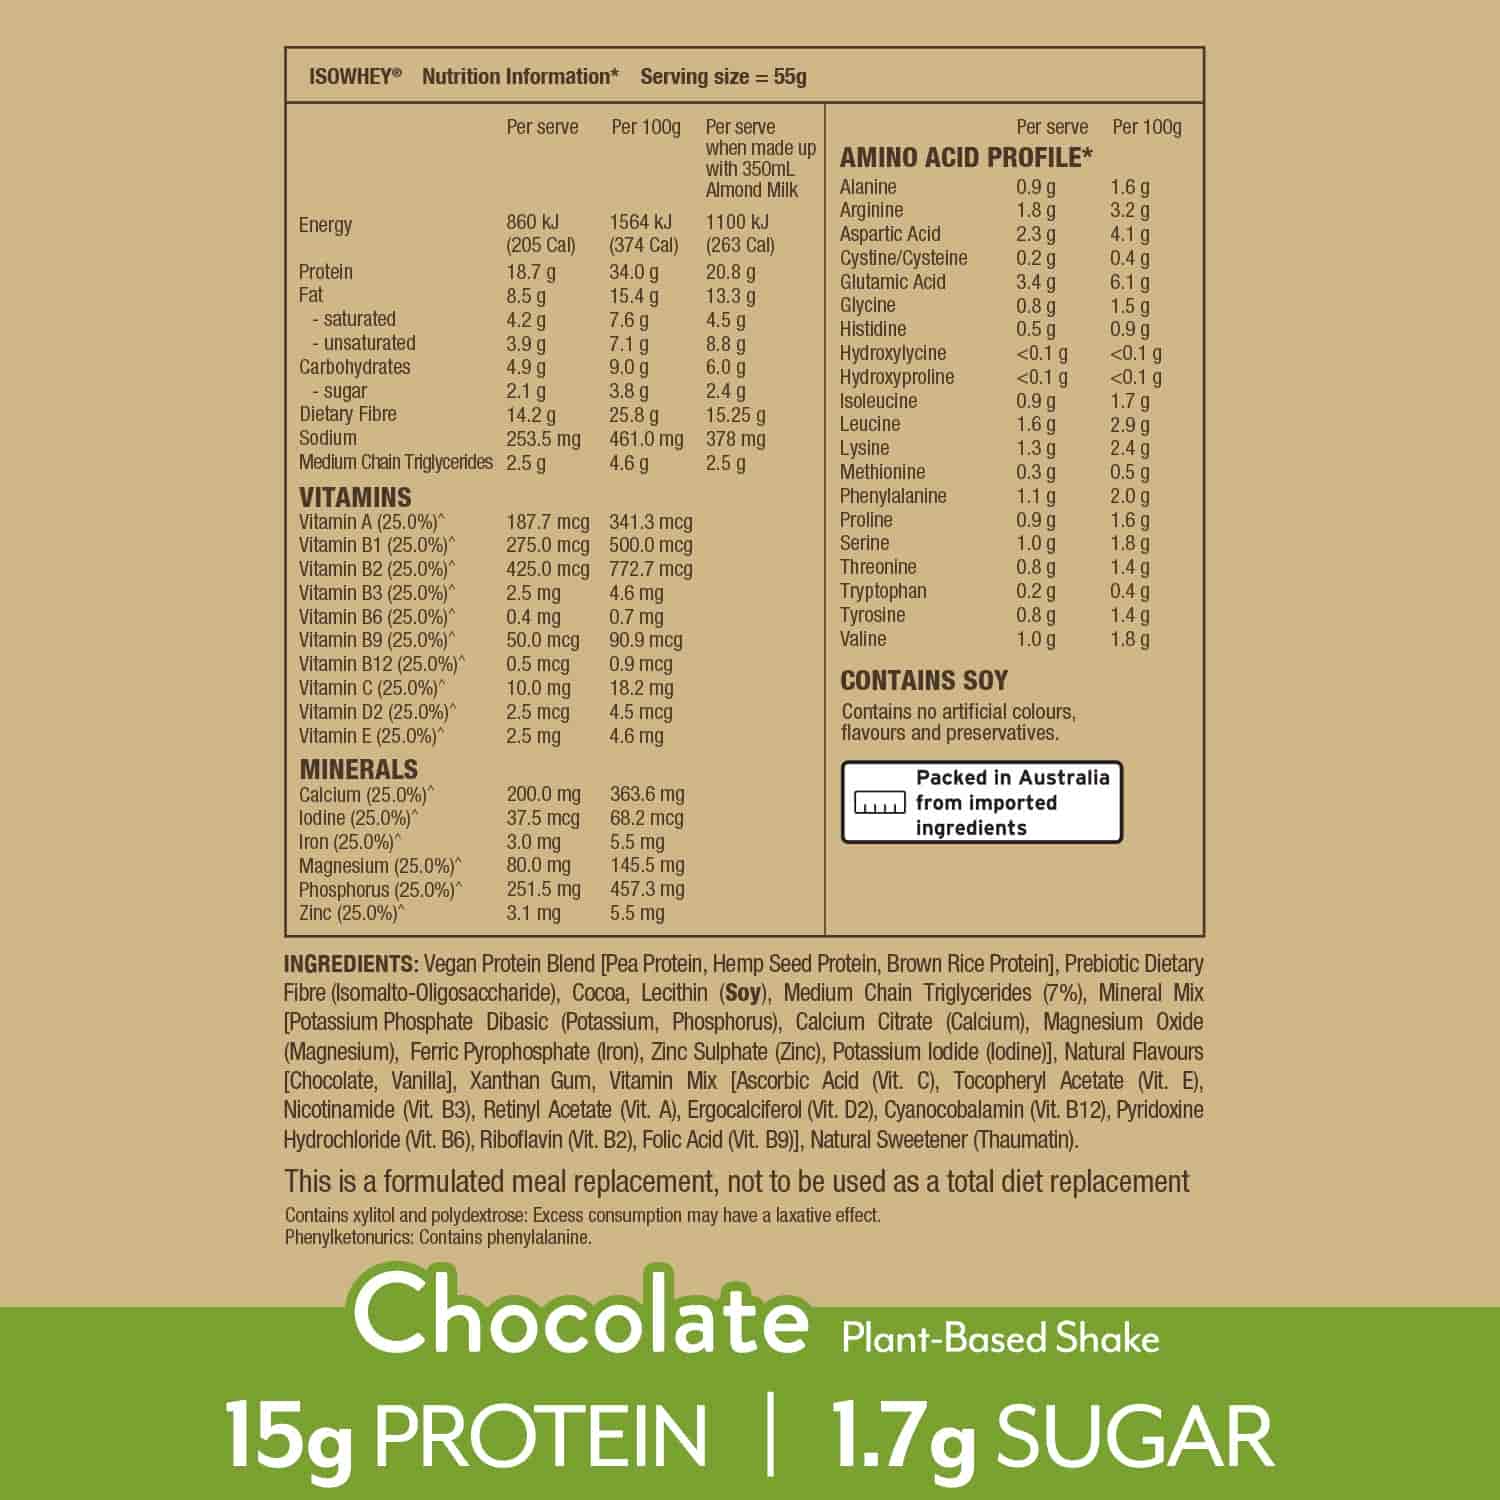 IsoWhey Plant-Based Meal Replacement Chocolate Shake 550g with nutrional information